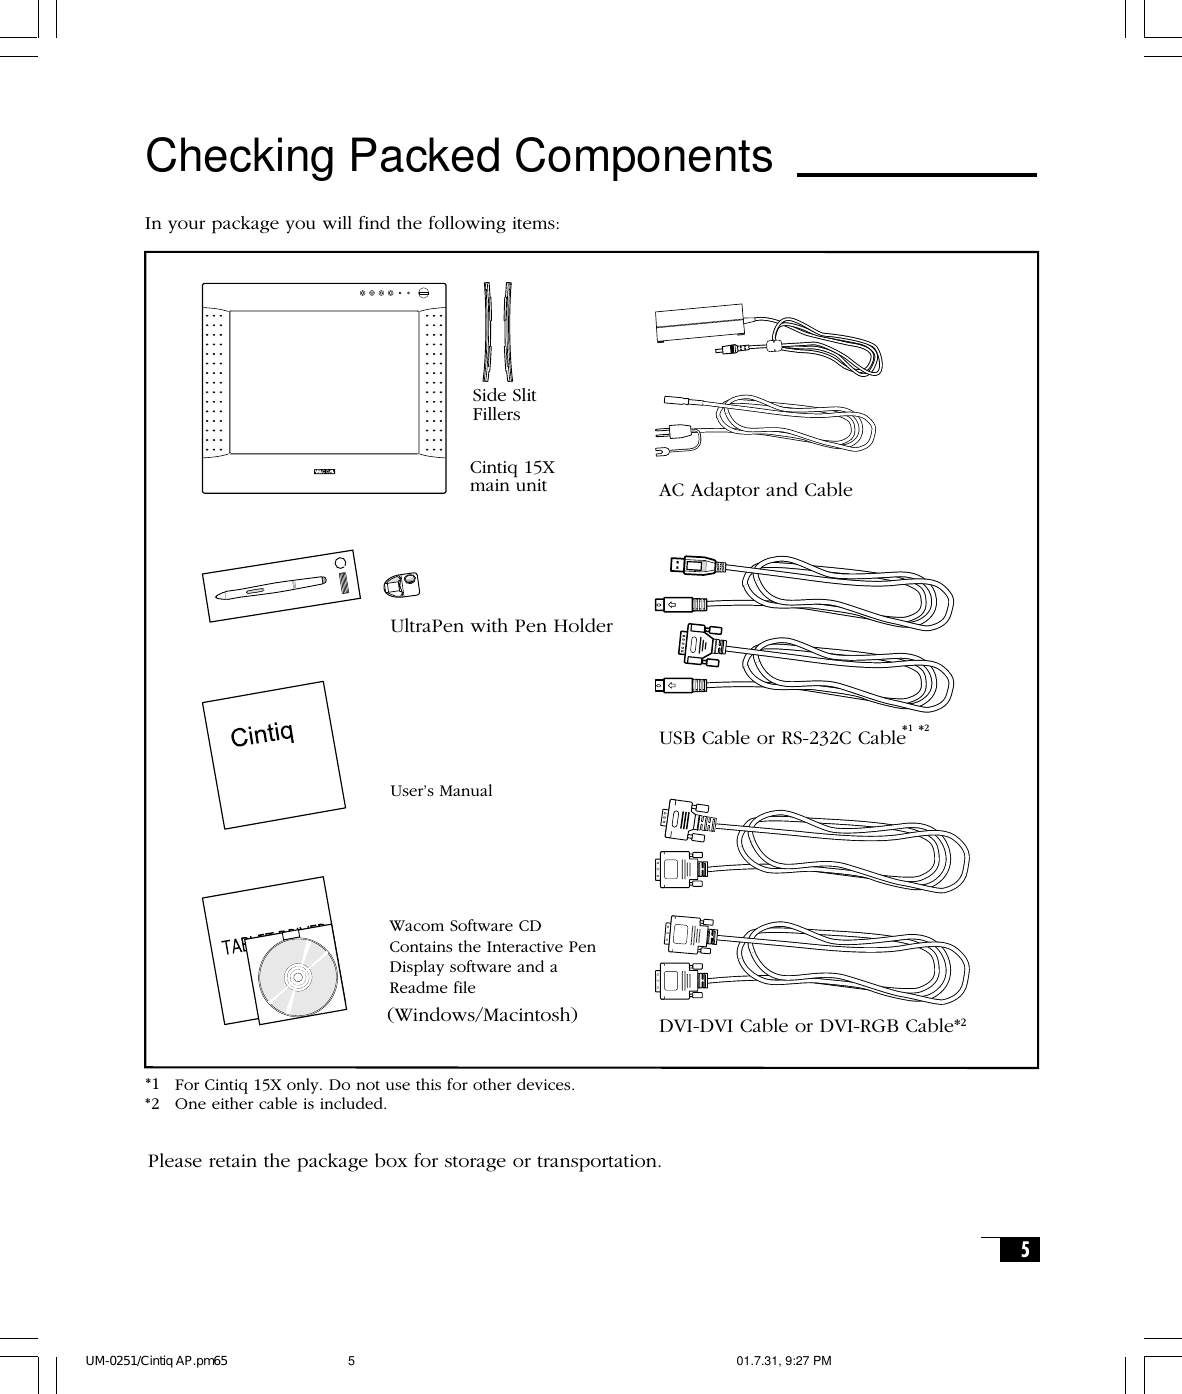 5Checking Packed ComponentsIn your package you will find the following items:USB Cable or RS-232C CableDVI-DVI Cable or DVI-RGB Cable*2Cintiq 15Xmain unitUltraPen with Pen HolderUser’s ManualWacom Software CDContains the Interactive PenDisplay software and aReadme file(Windows/Macintosh)AC Adaptor and CableSide SlitFillers*1*1 *2For Cintiq 15X only. Do not use this for other devices.One either cable is included.*2Please retain the package box for storage or transportation.UM-0251/Cintiq AP.pm65 01.7.31, 9:27 PM5